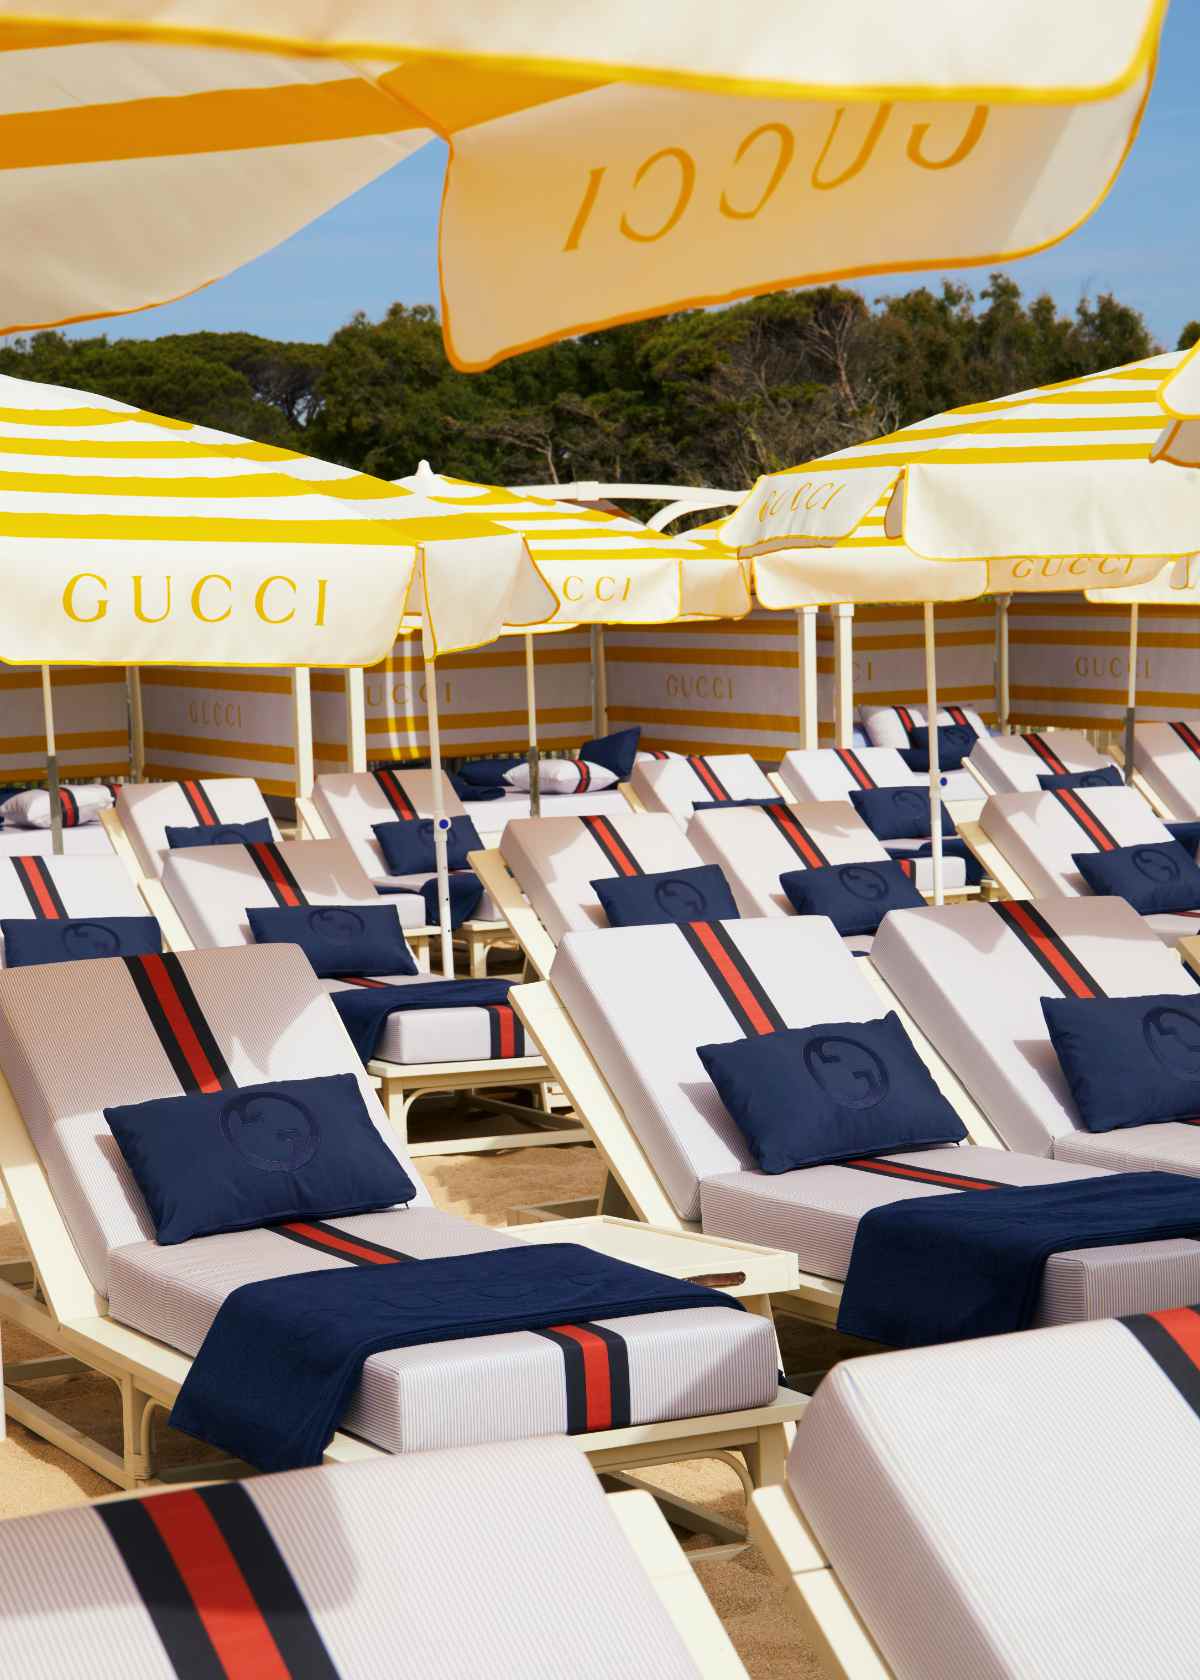 Gucci Inaugurates The Reopening Of Its Boutique In Saint-Tropez